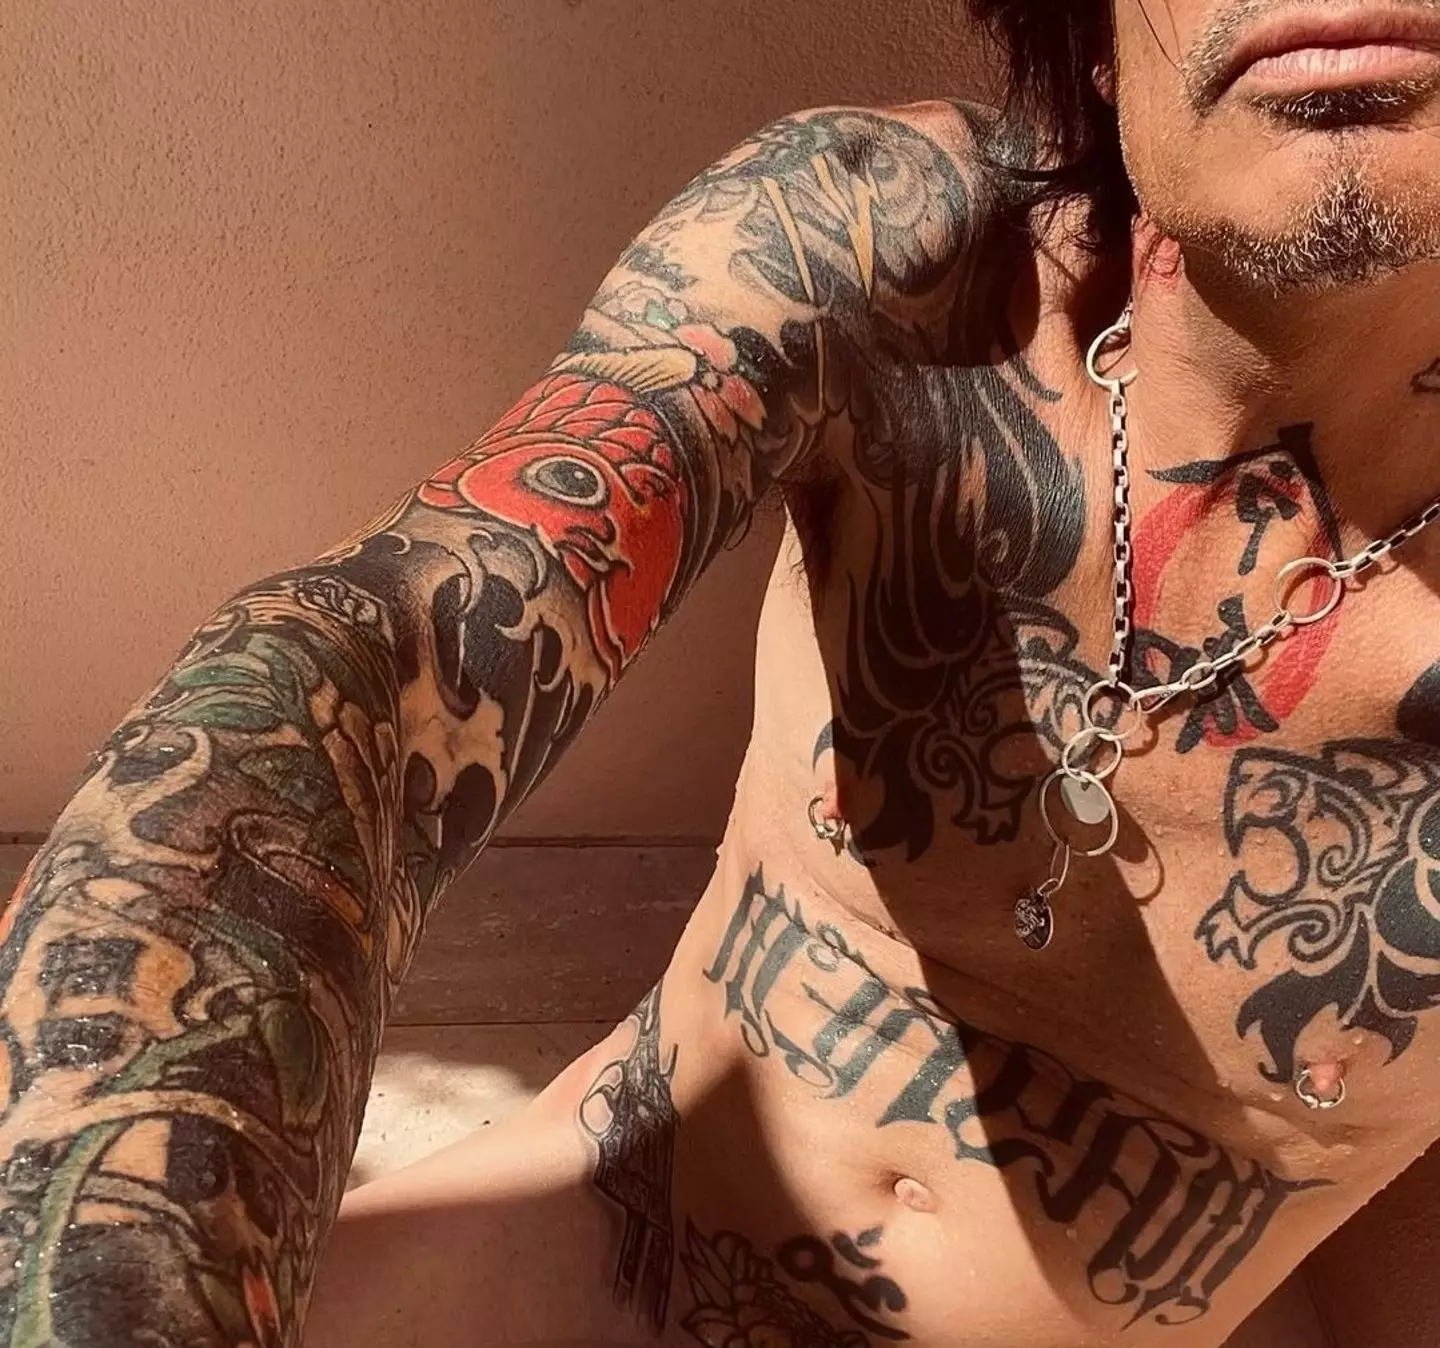 Tommy Lee shocked social media by sharing the nude on Instagram.